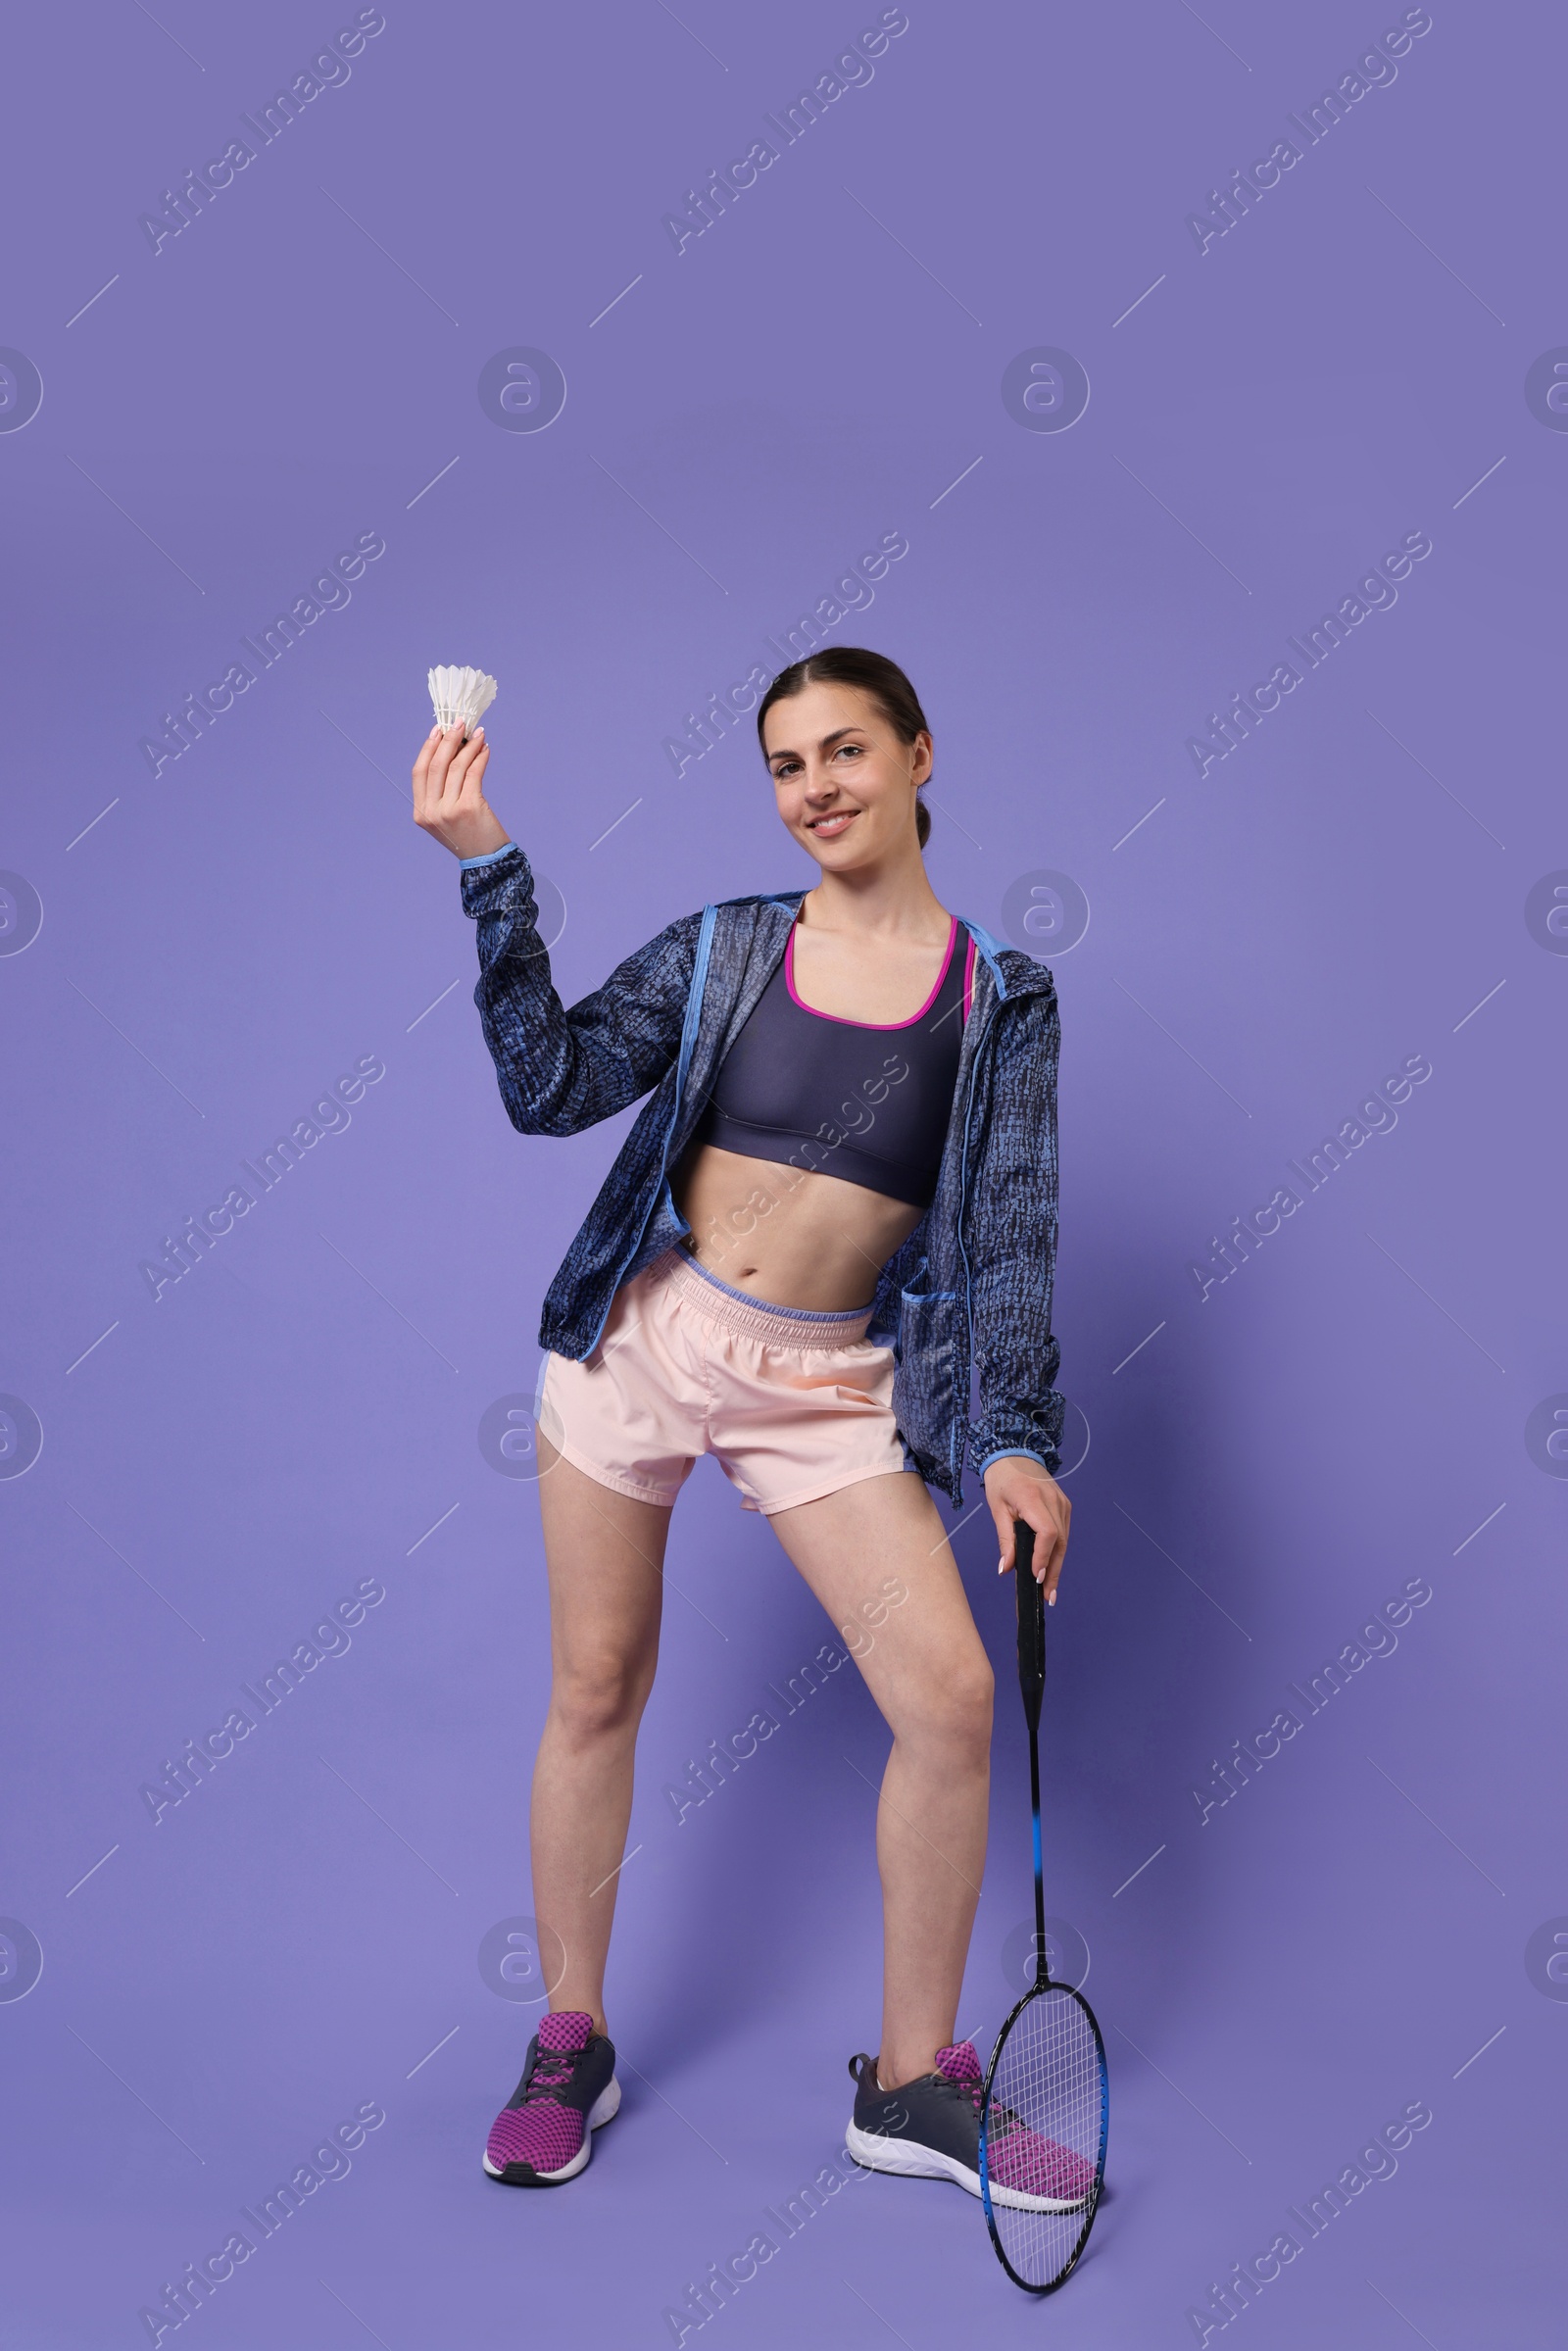 Photo of Young woman with badminton racket and shuttlecock on purple background